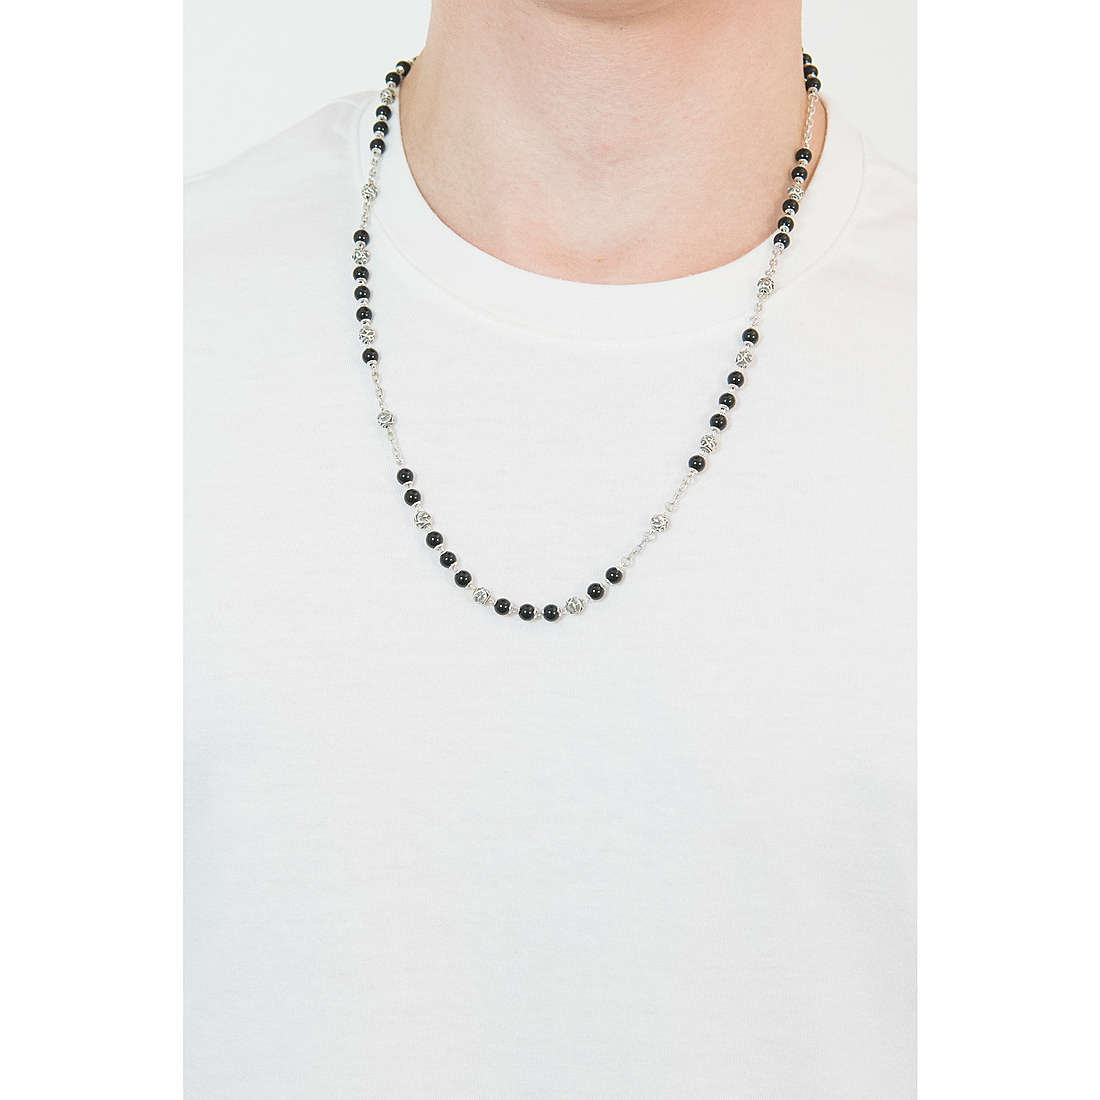 Cesare Paciotti necklaces Black Thinking man JPCL1425B wearing